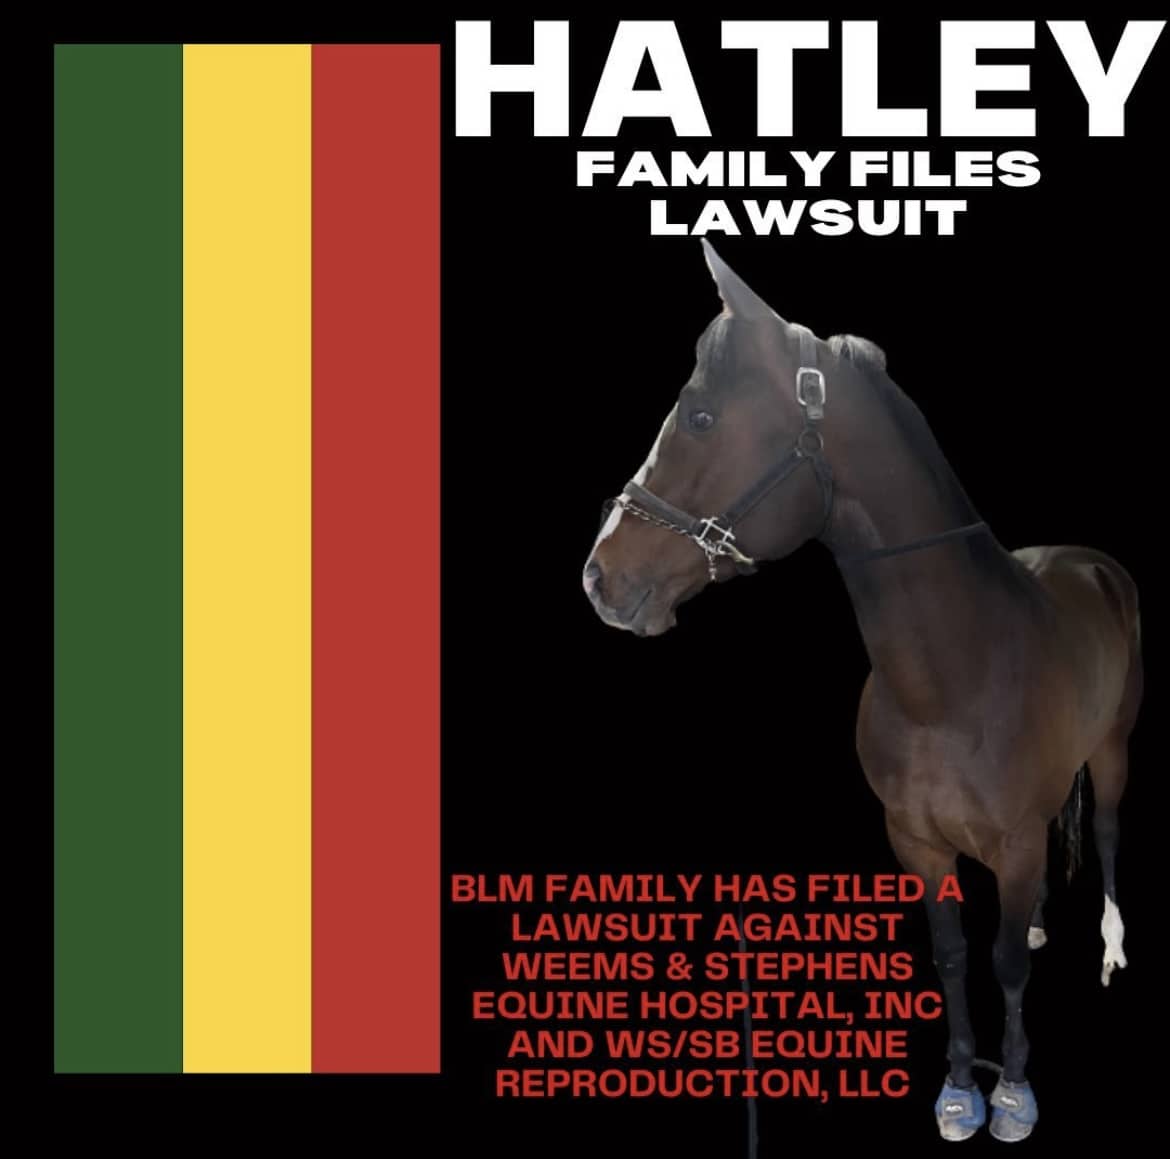 CURRENT EVENT: Hatley Family Files Lawsuit